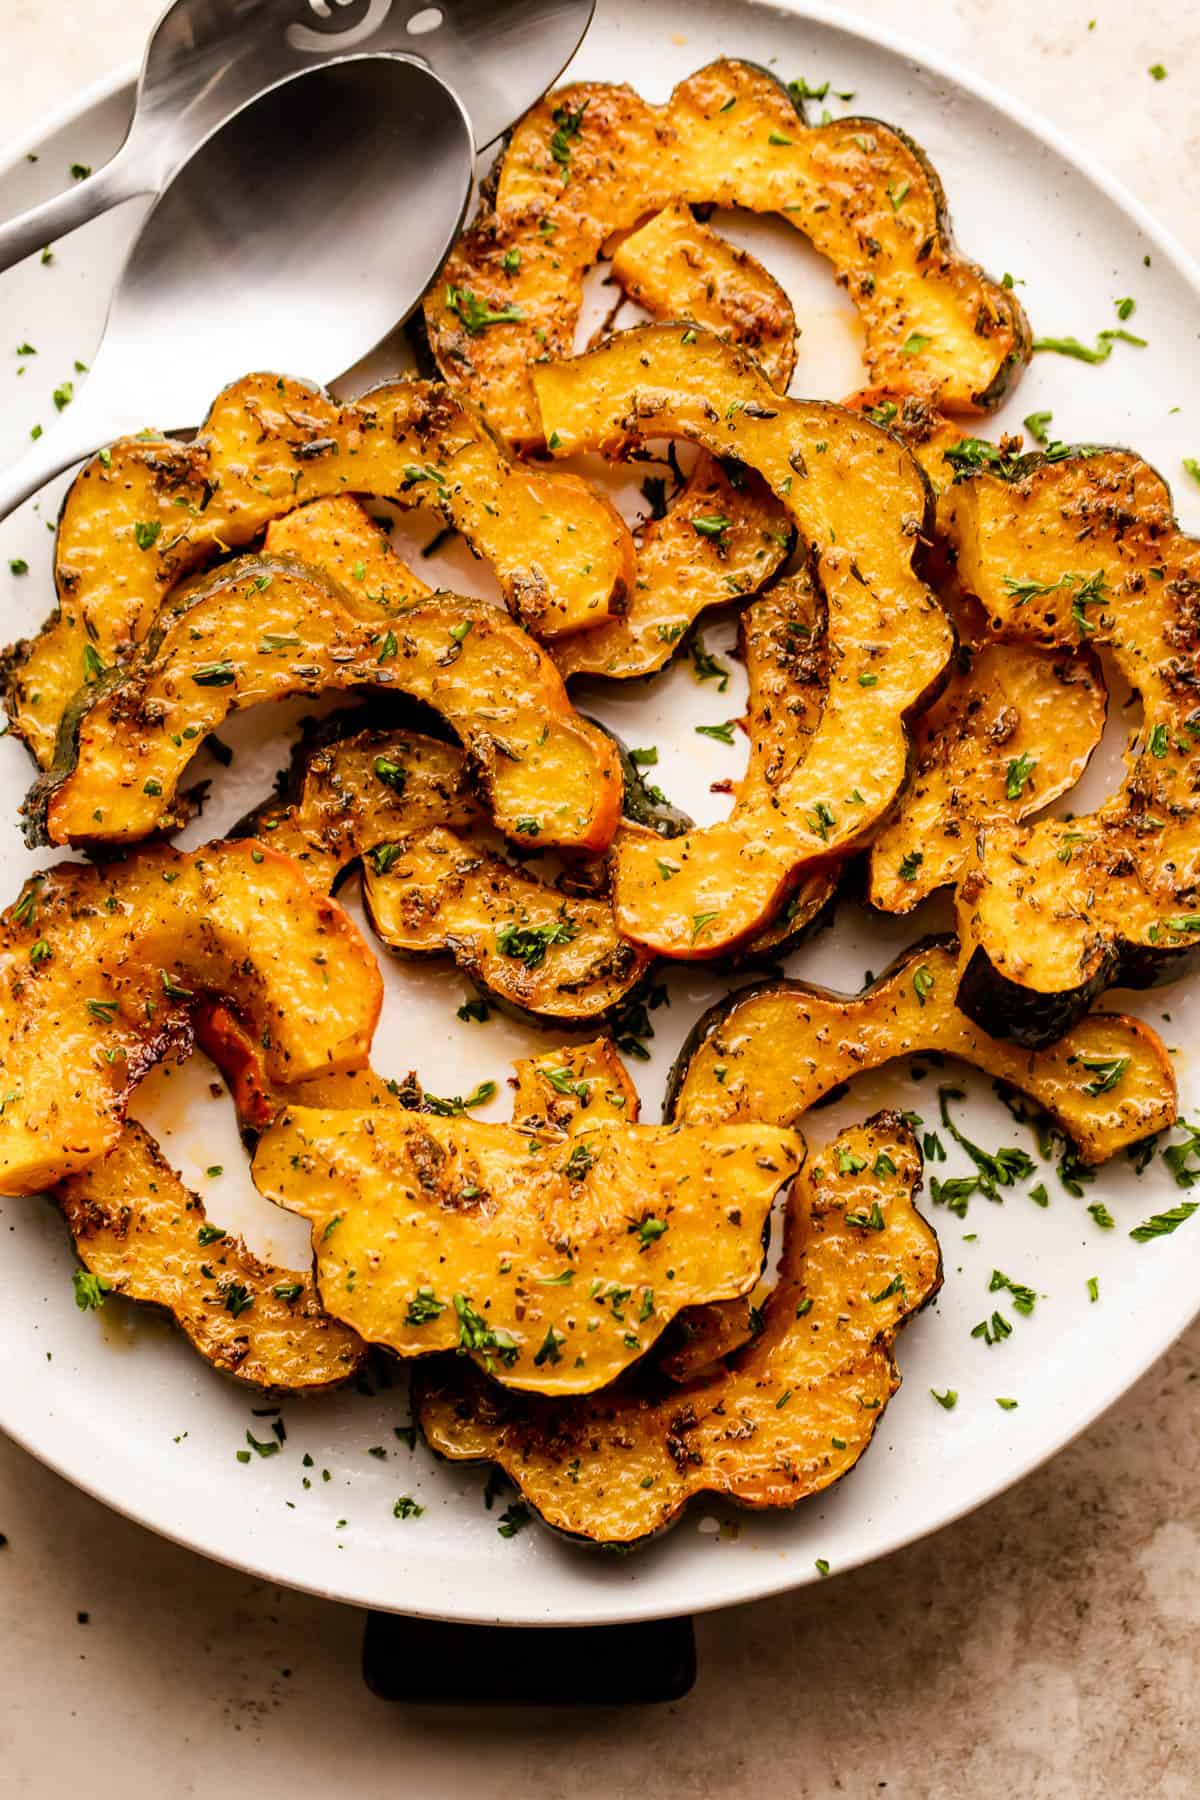 roasted acorn squash cut into half-moon slices, arranged on a white plate and seasoned with oil and herbs.